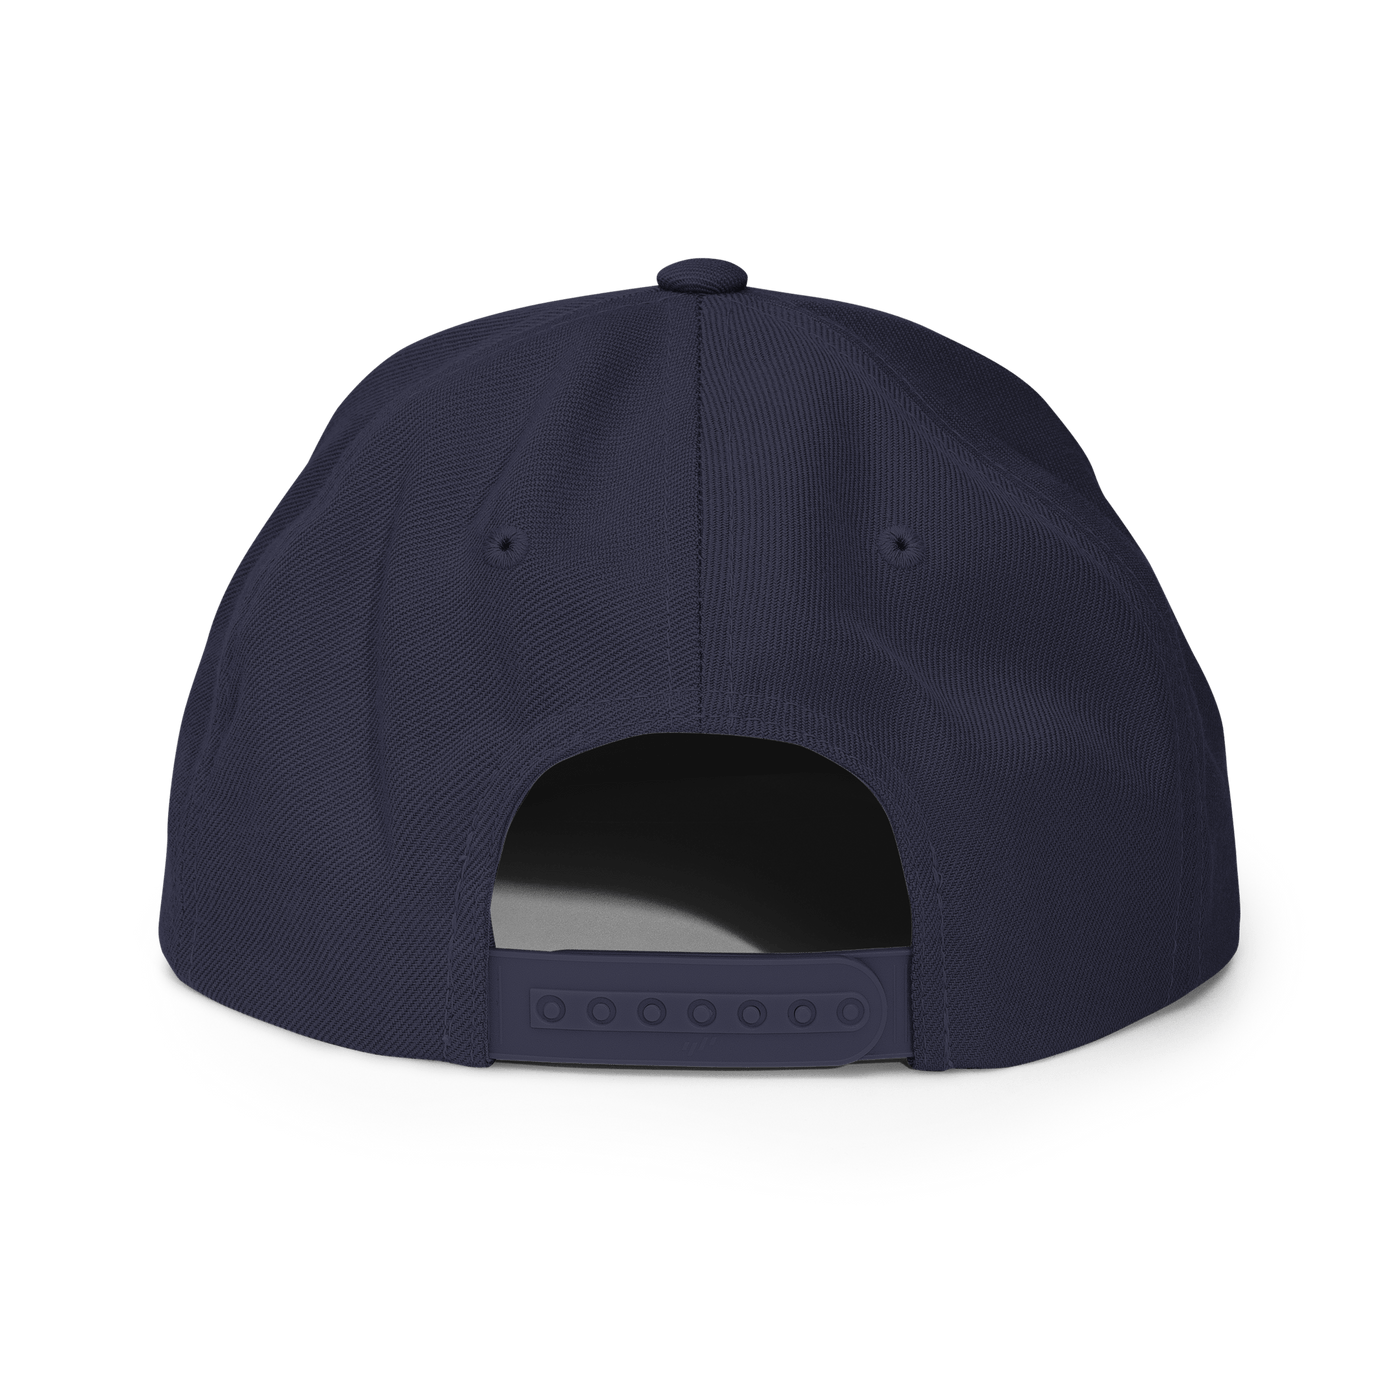 JACS Fries Snapback Hat - Maroon - - Just Another Cap Store